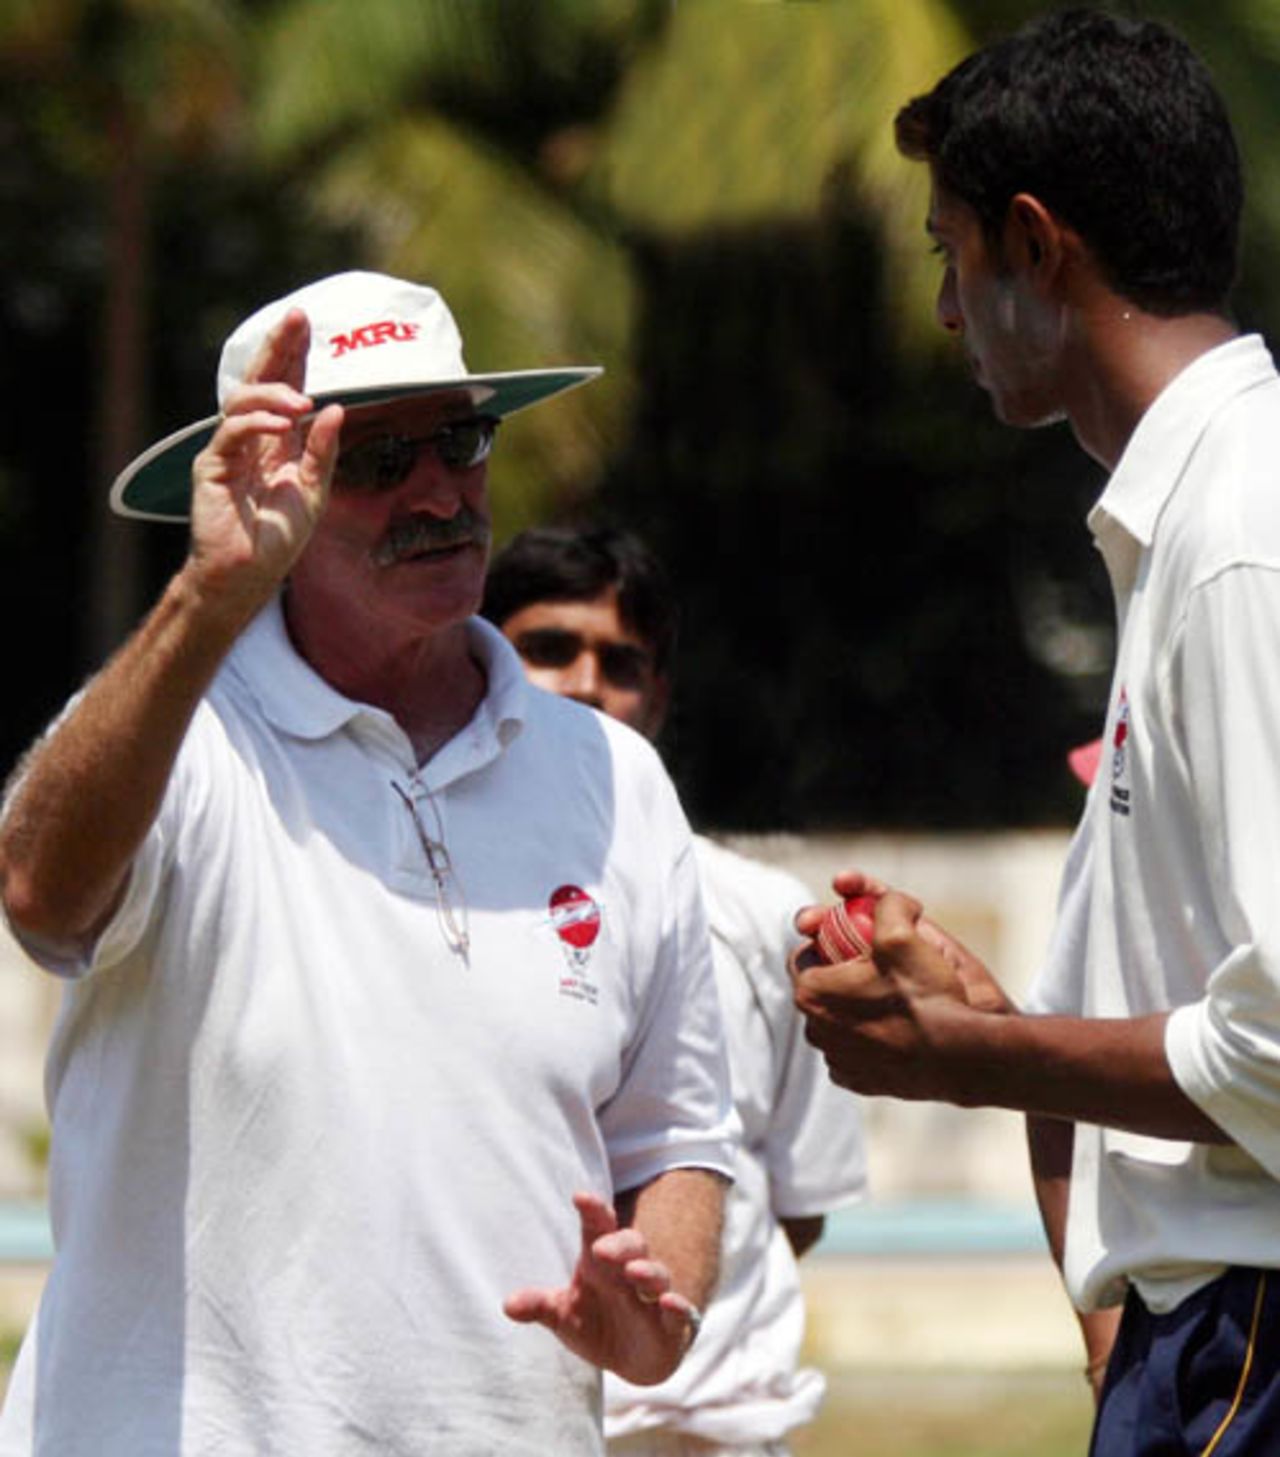 Dennis Lillee gives tips to trainees at the MRF Pace foundation, Chennai, February 23, 2007